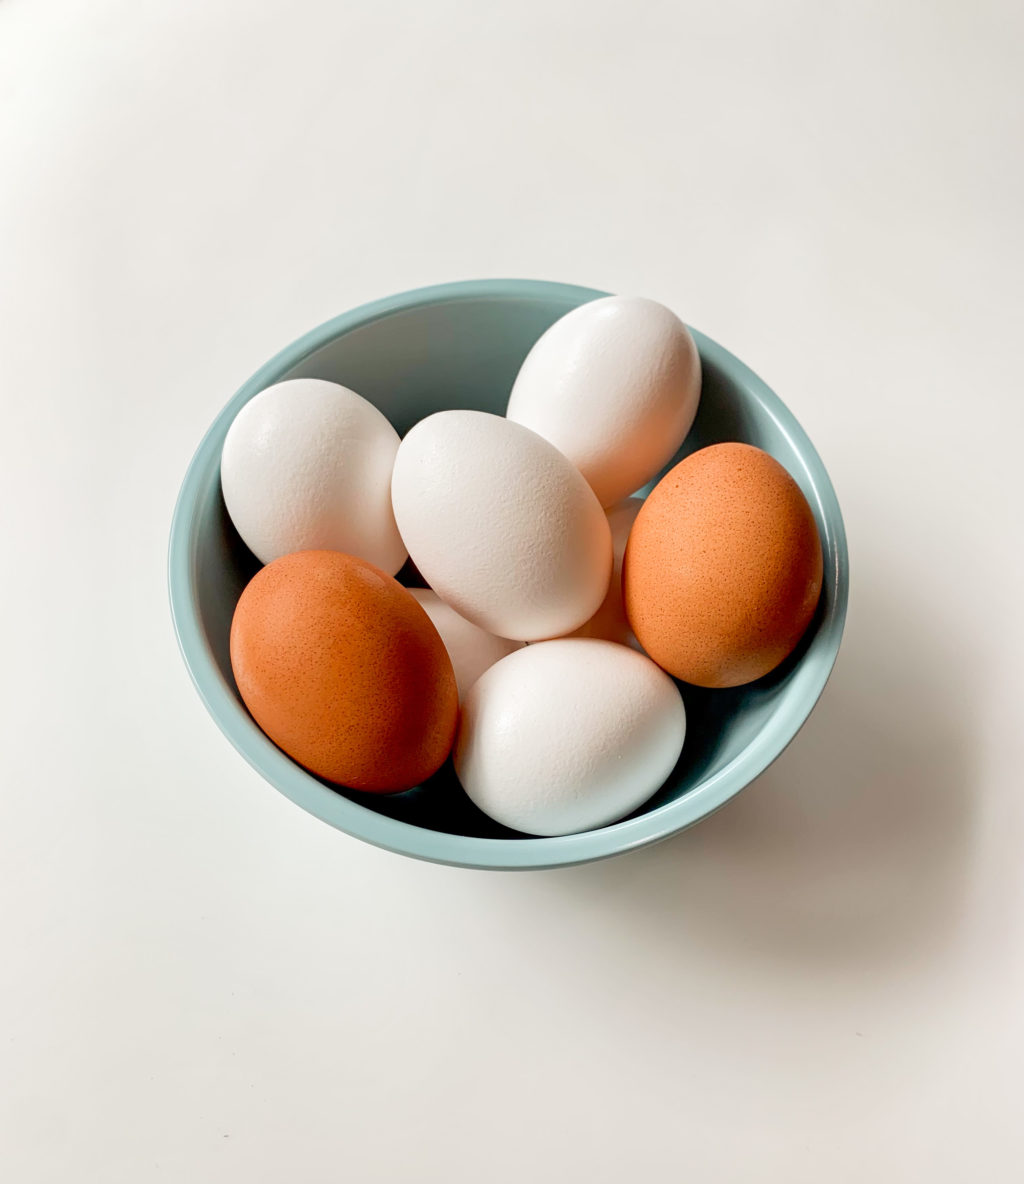 Brown and white eggs in a bowl